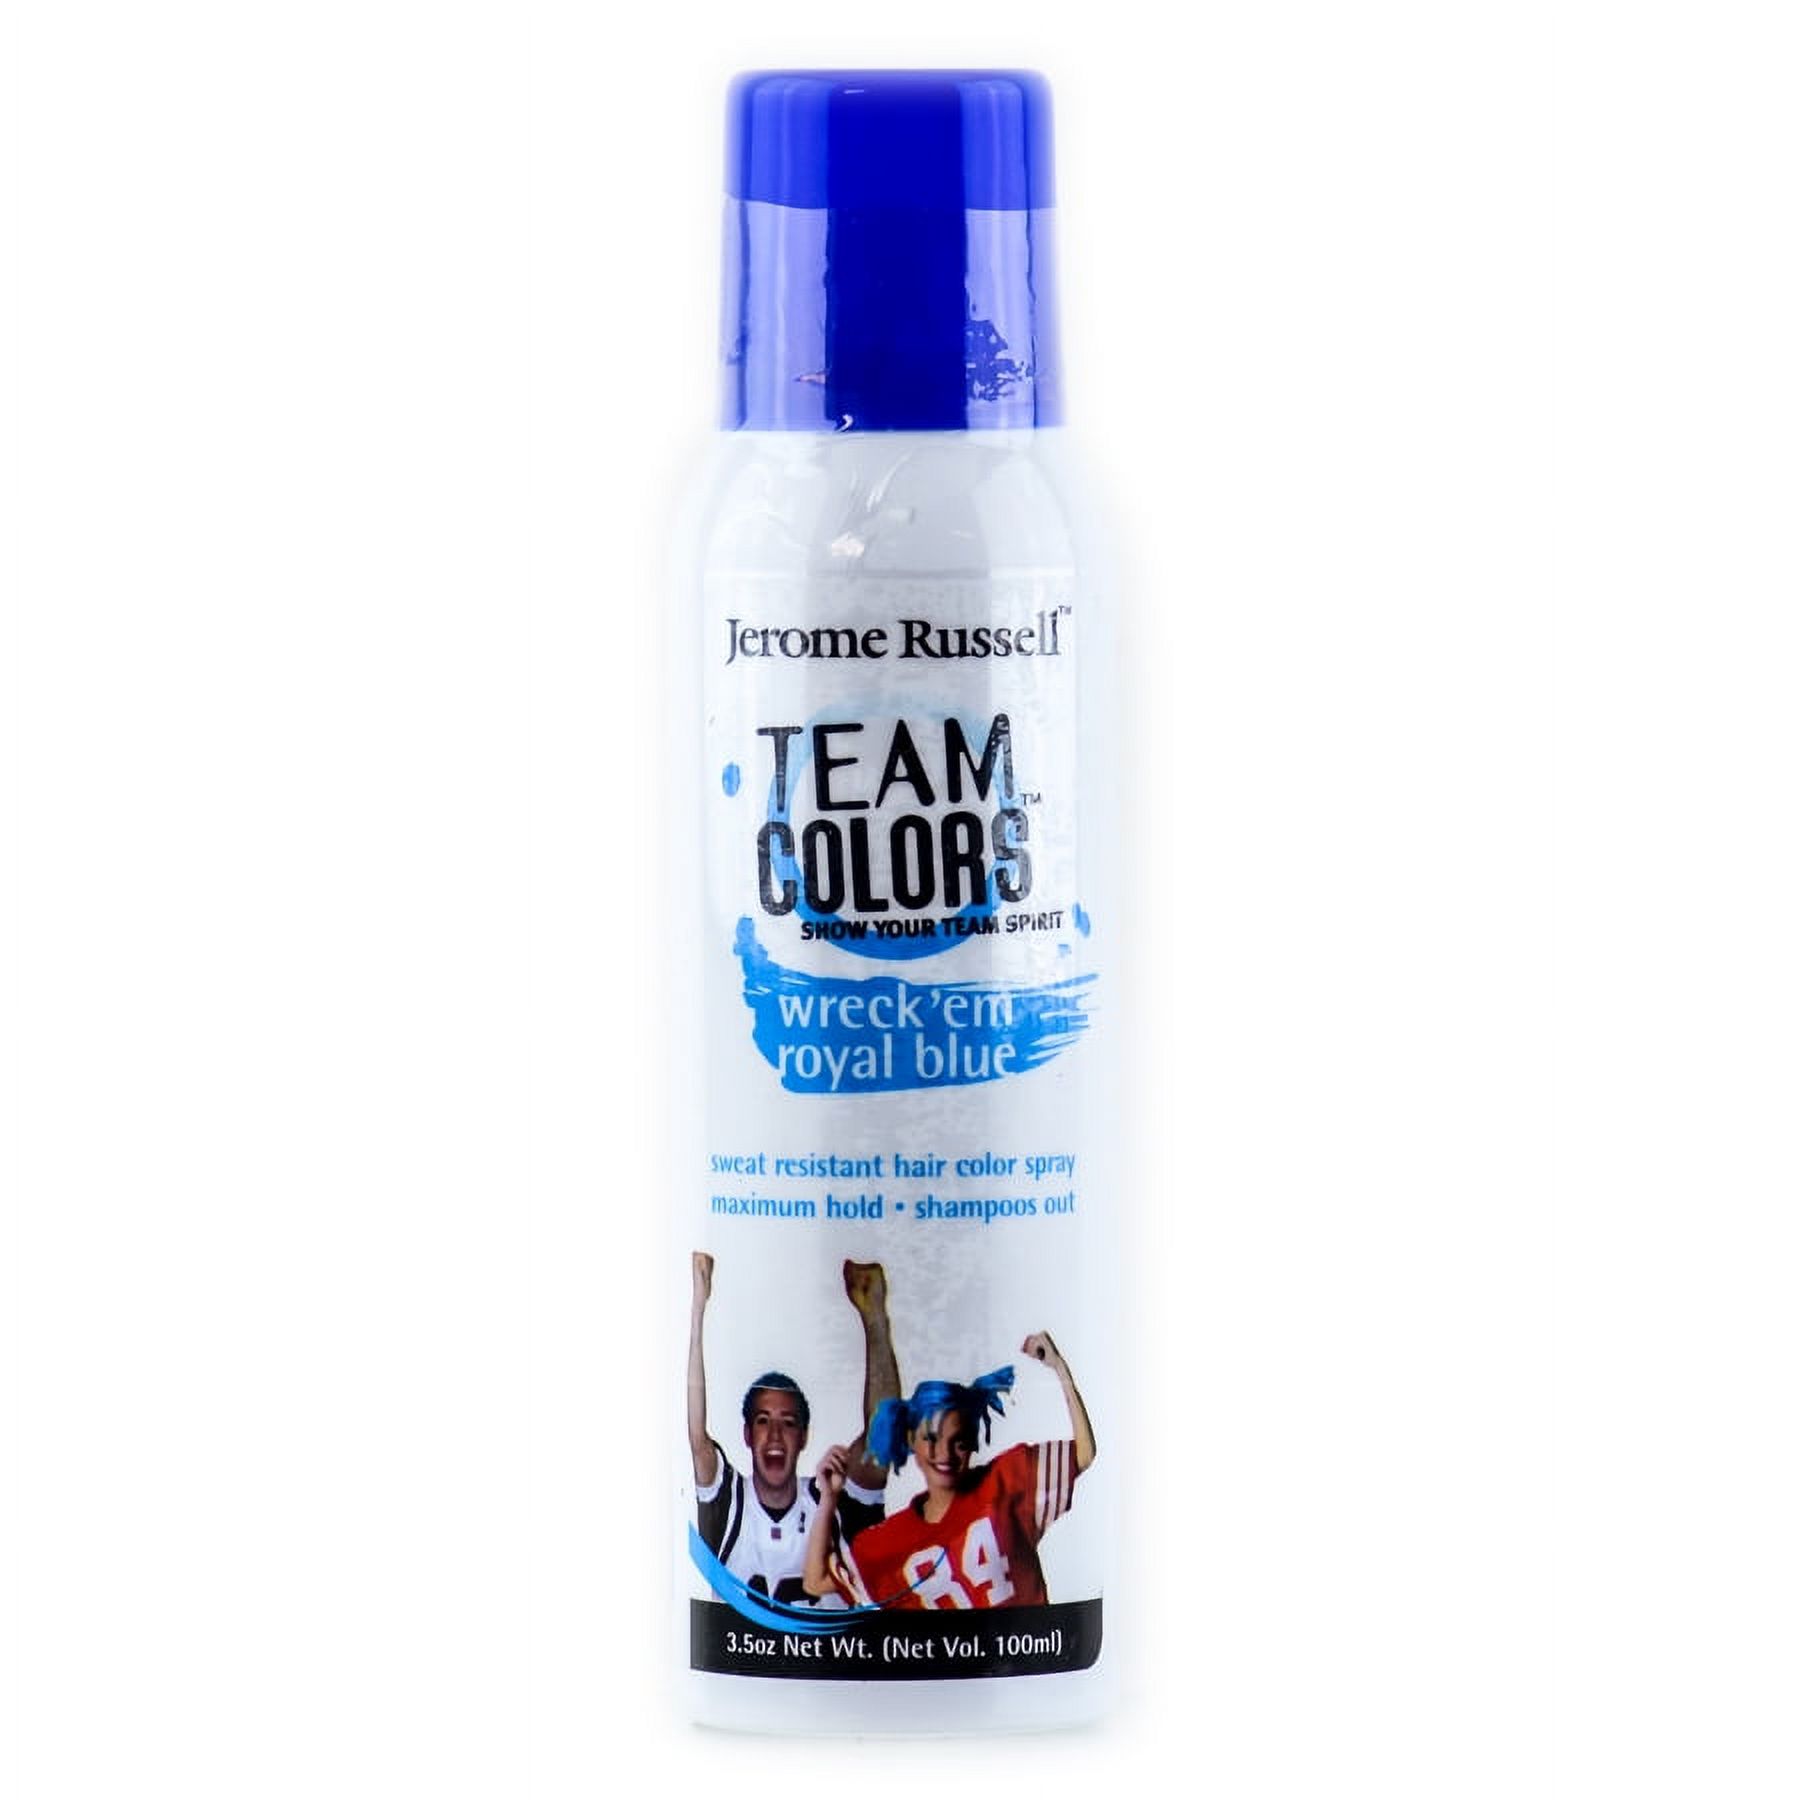 Jerome Russell Team Colors Spray (Color : Wreck Royal Blue - 3.5 oz) - image 1 of 1